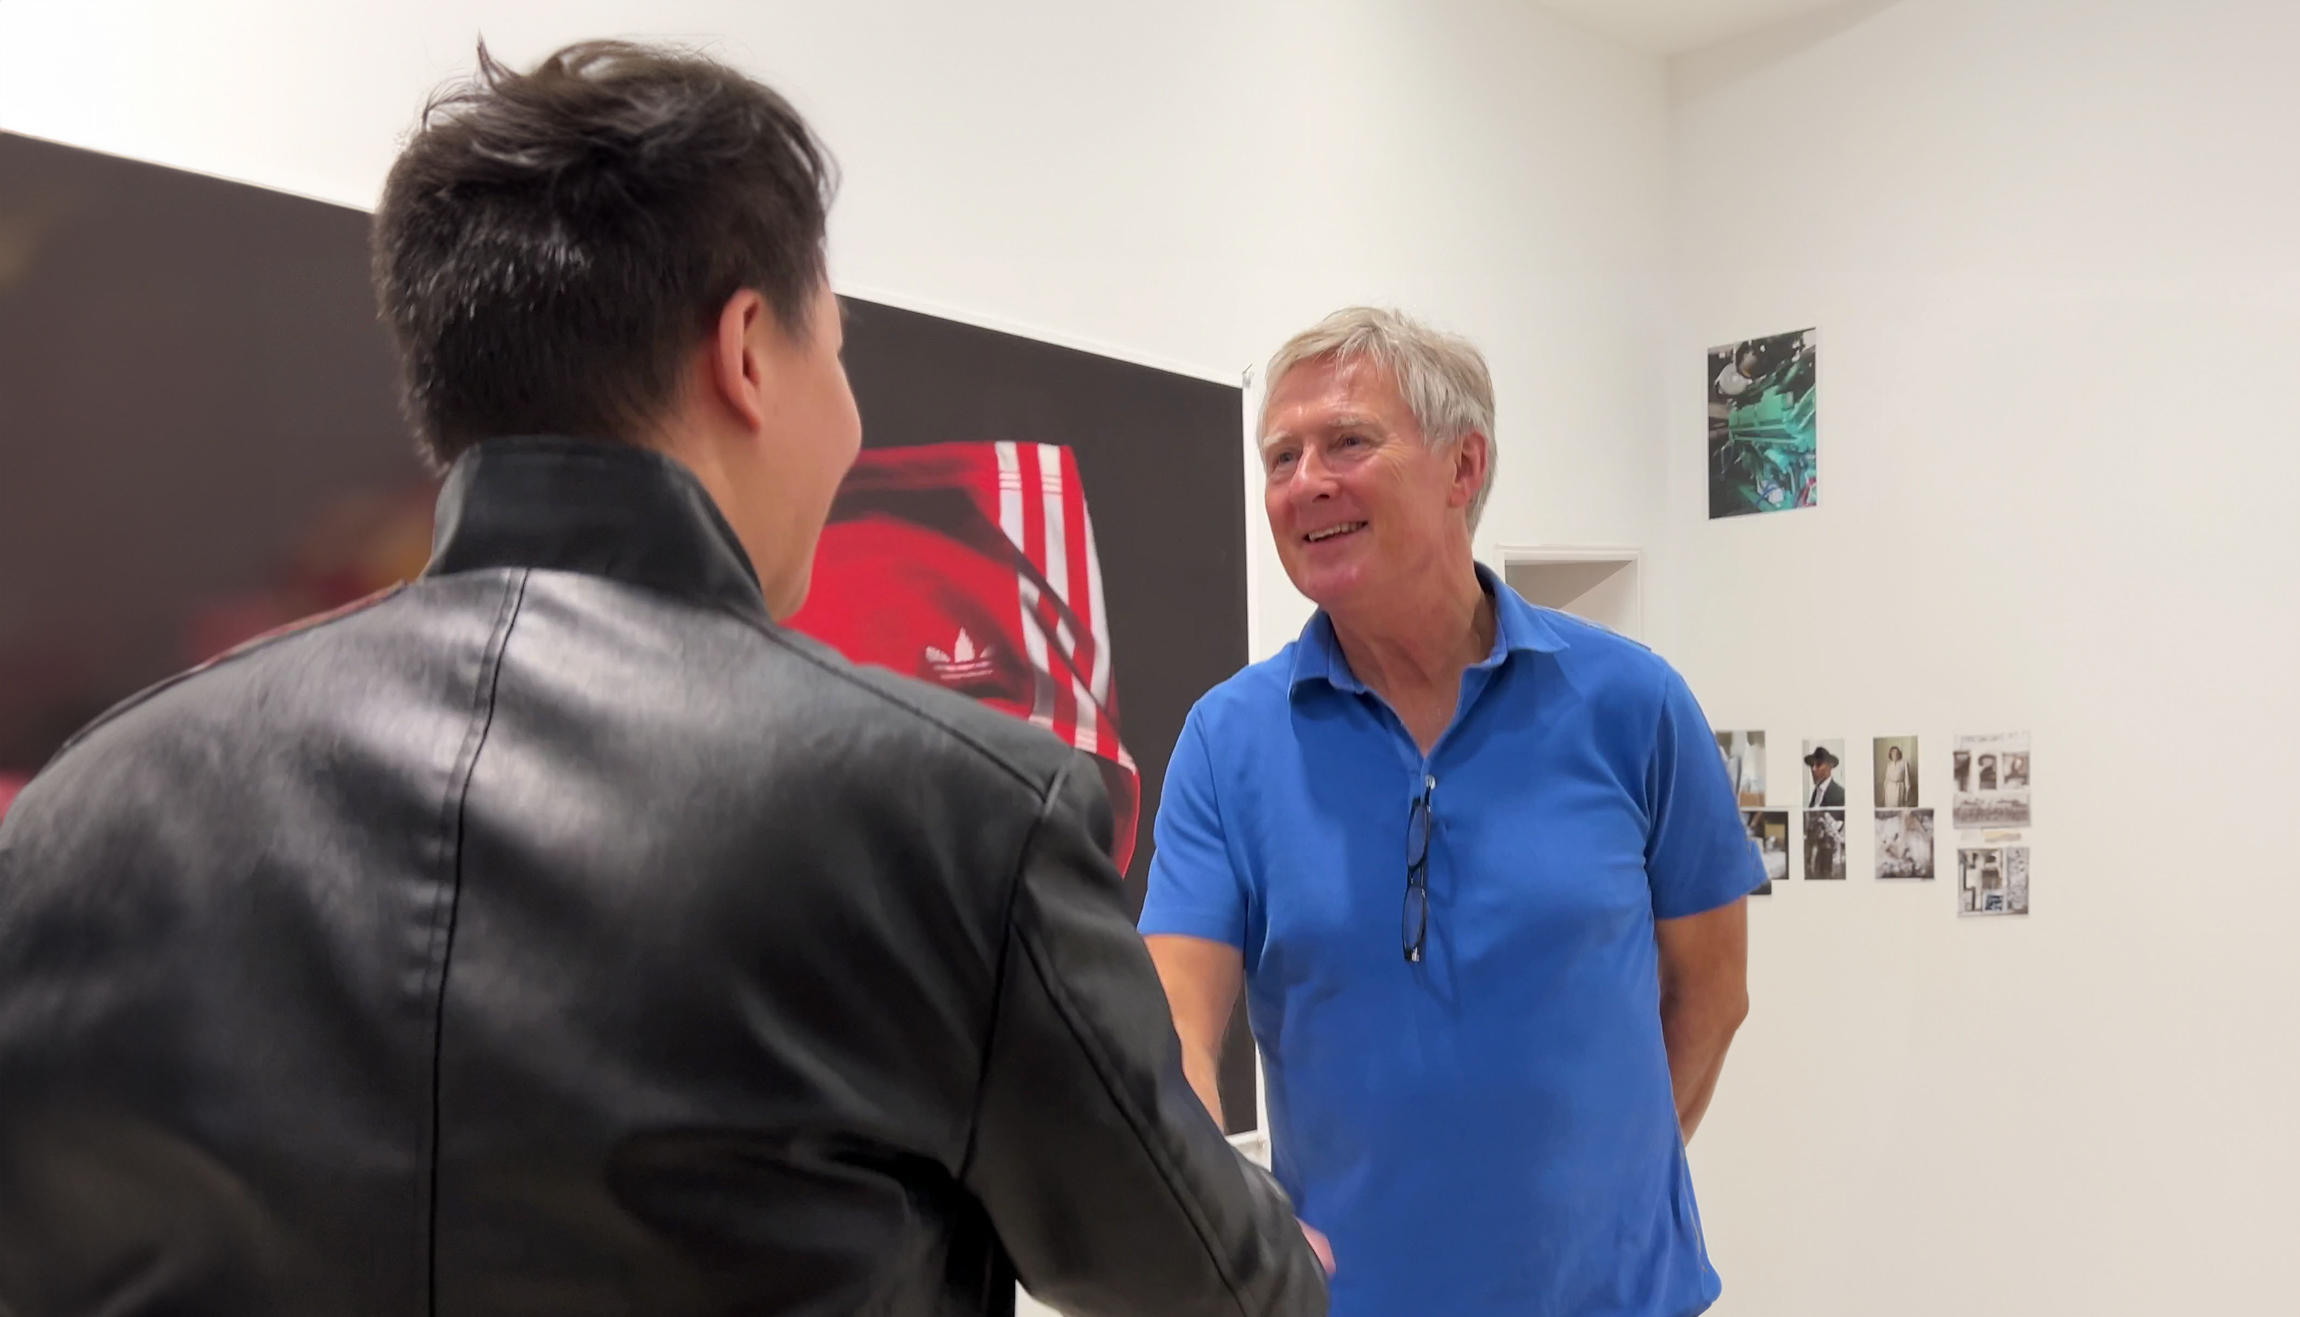 David Zwirner and Michael Andrew Law